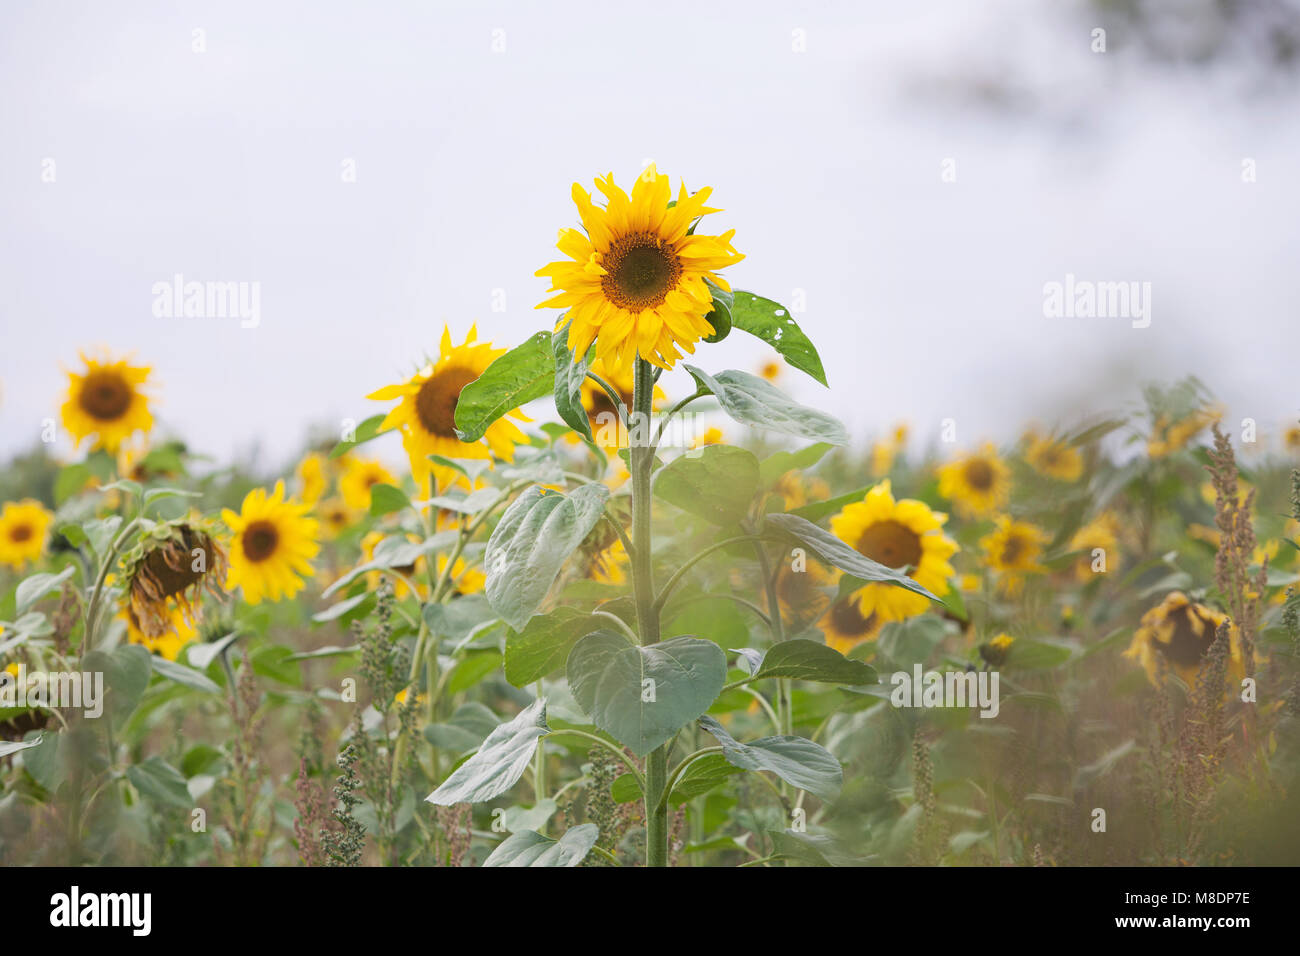 Sunflowers growing in field, close-up Stock Photo